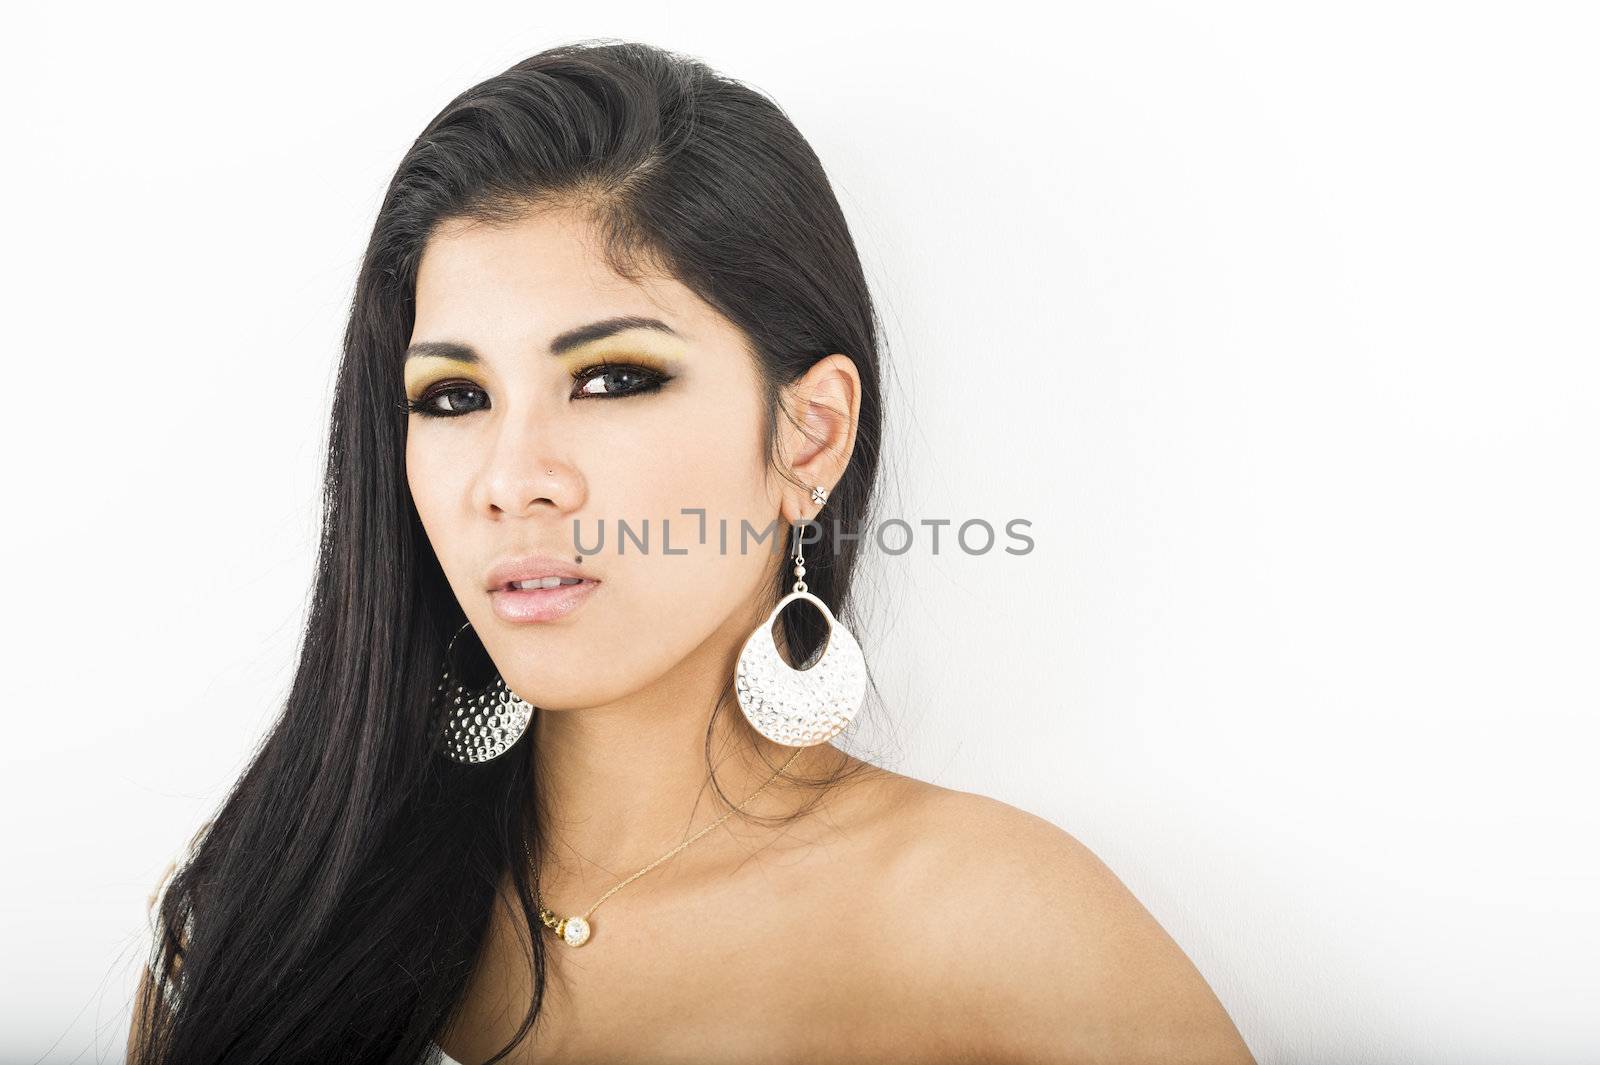 Sexy young Asian woman wearing large dangling earrings looking at the camera with a sultry look, studio portrait with copyspace